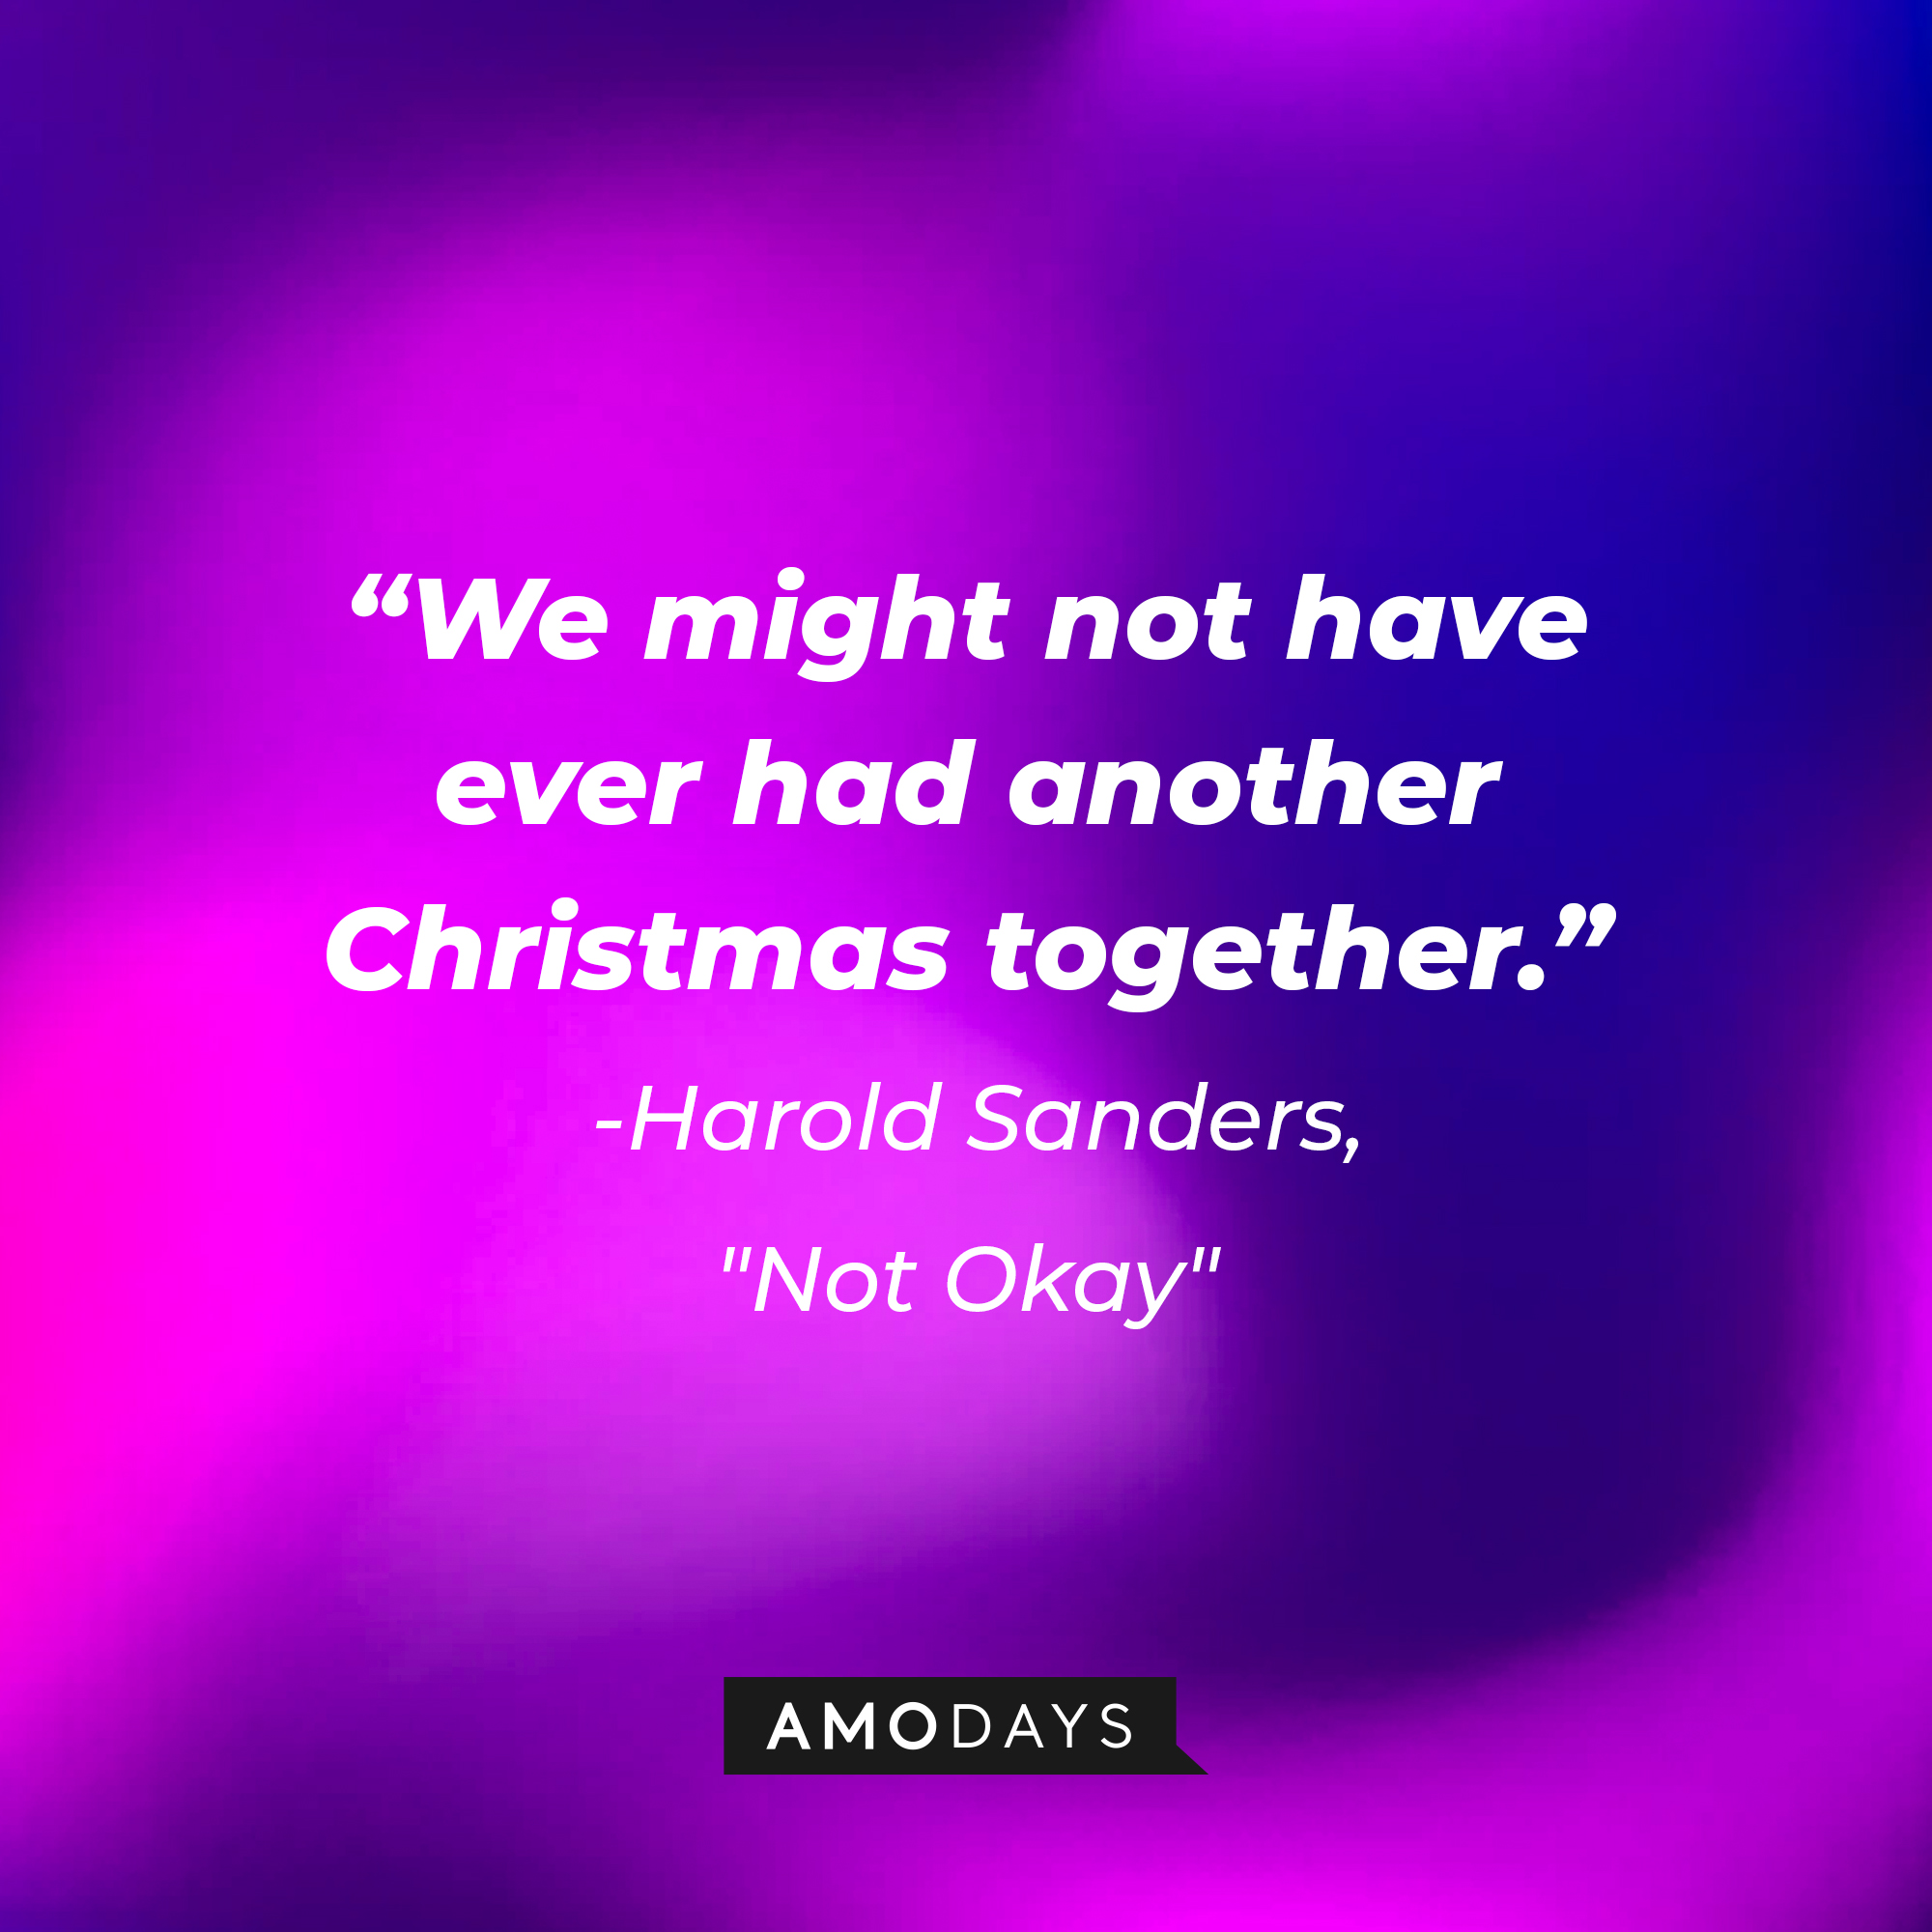 Harold Sanders' quote: "We might not have ever had another Christmas together." | Source: AmoDays